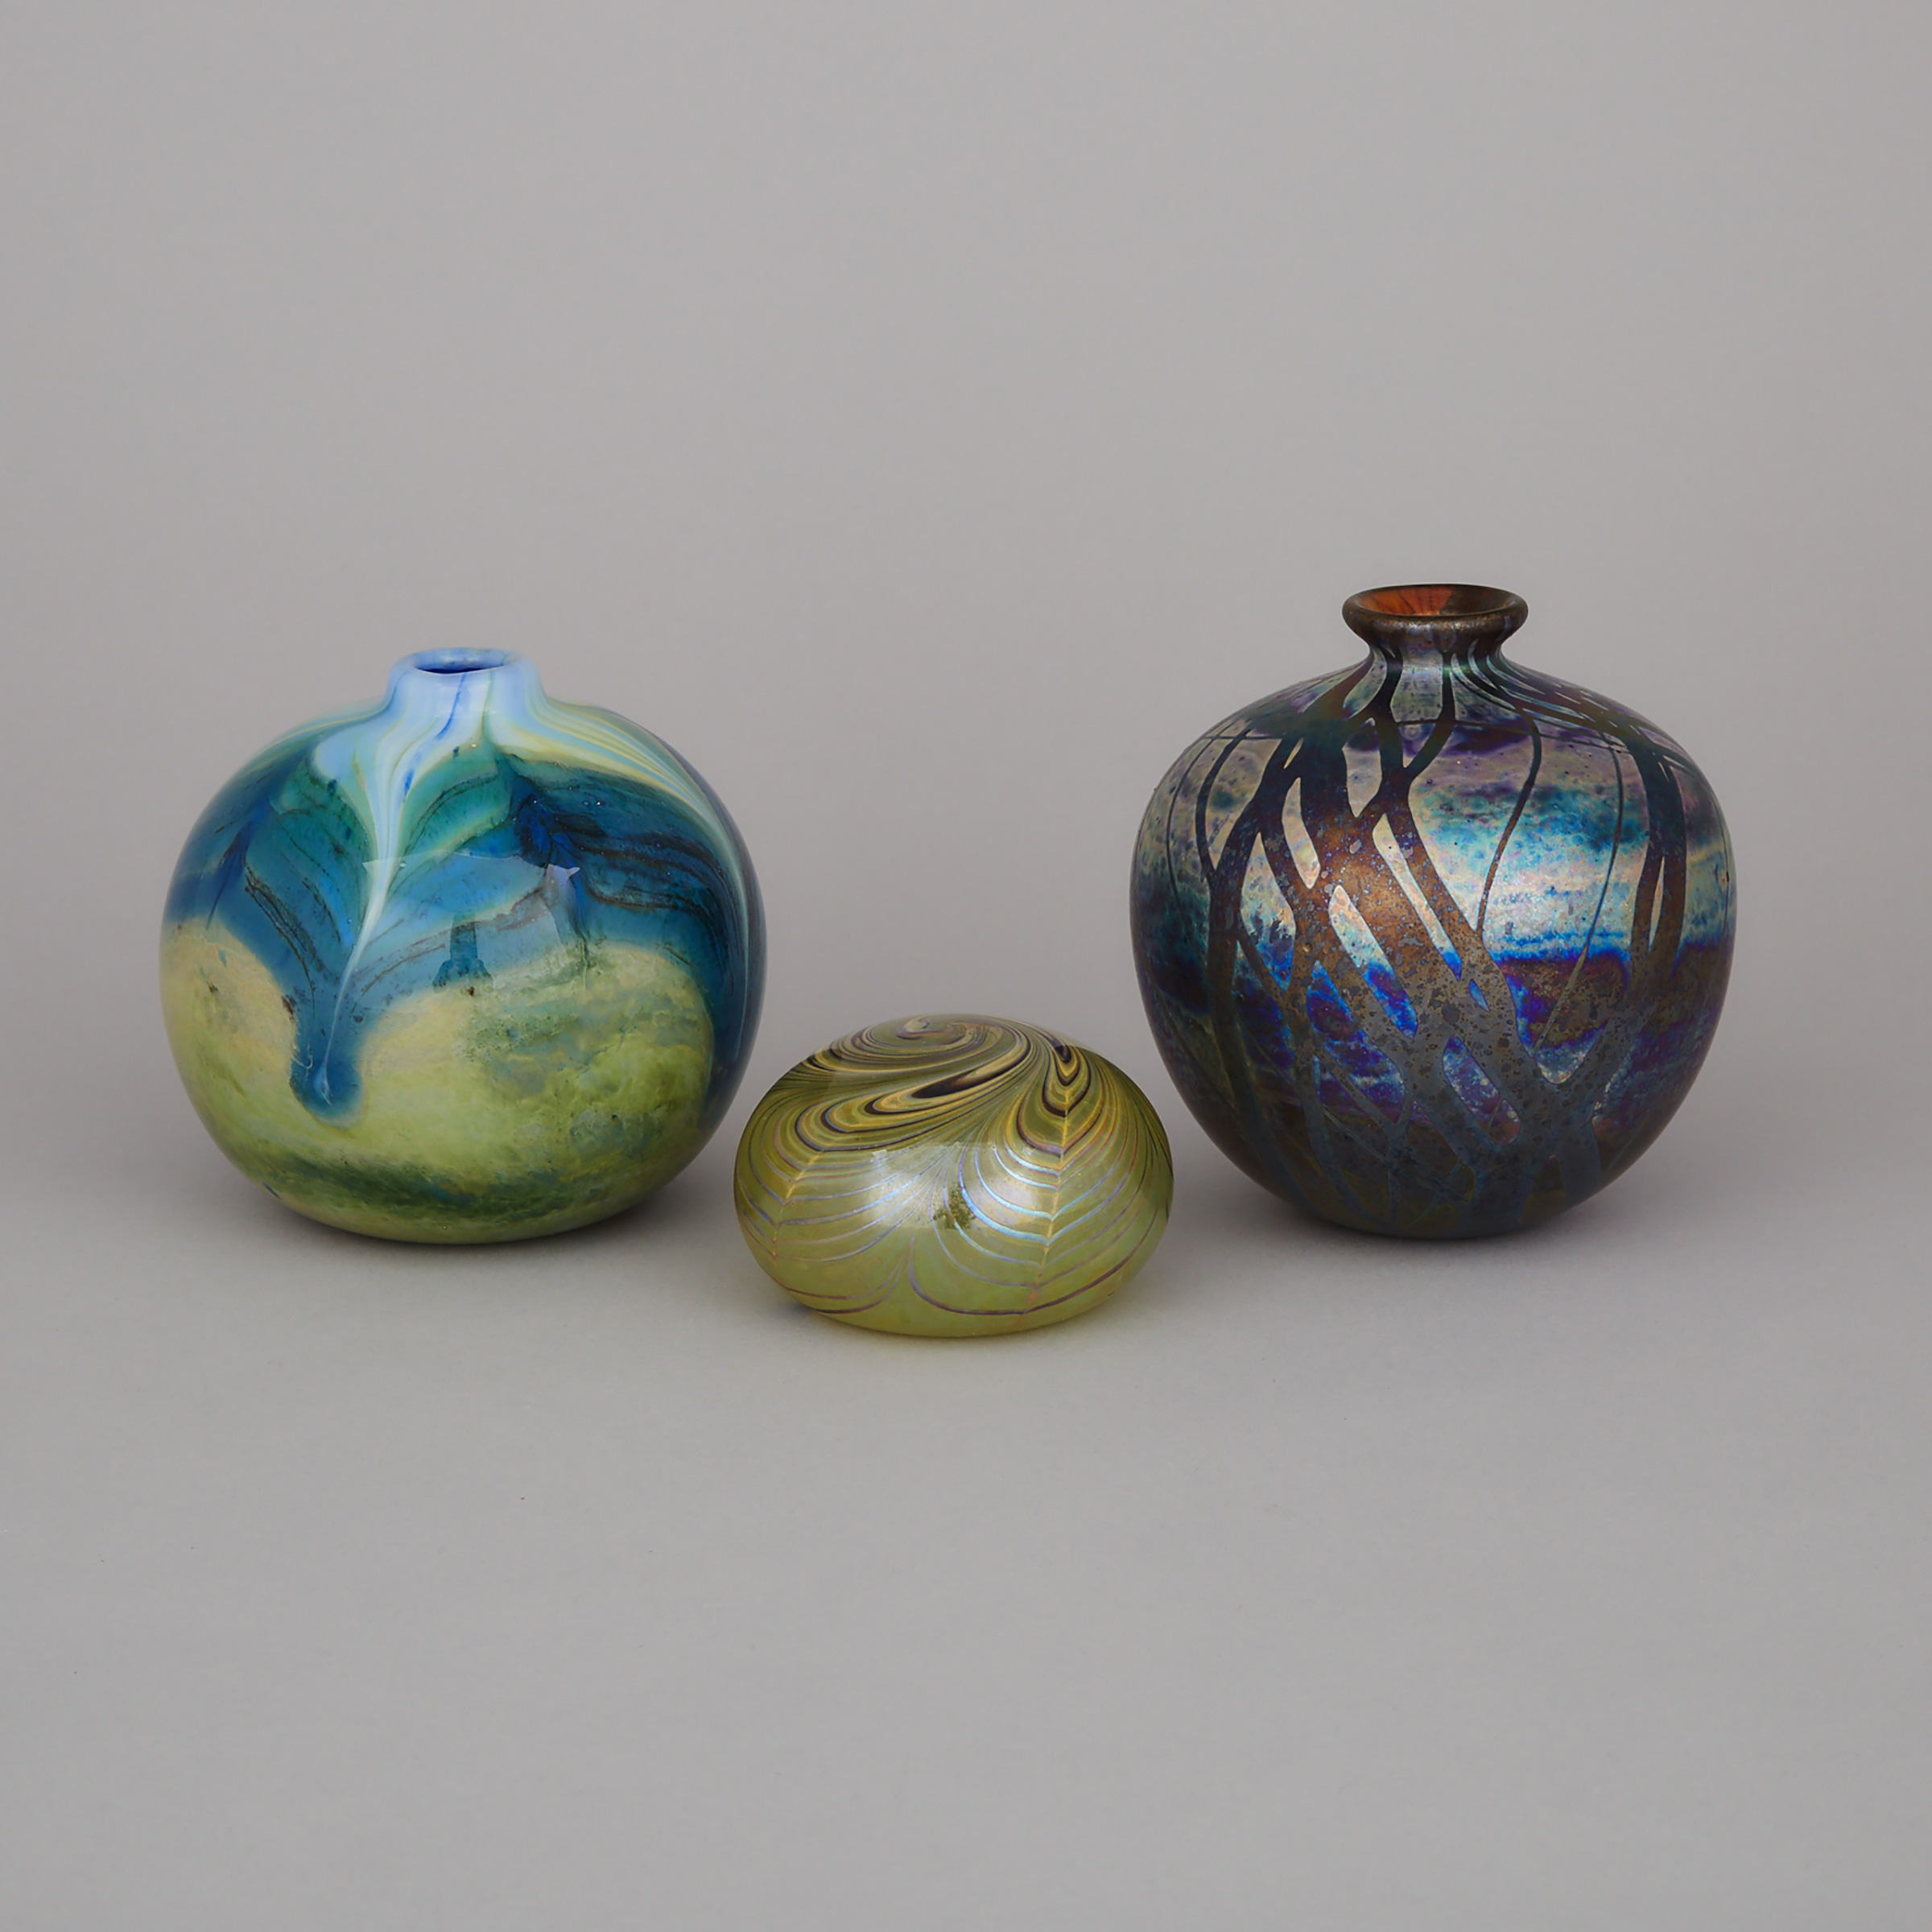 Daniel Crichton (Canadian, 1950-2002), Two Glass Vases and a Paperweight, 1976/77